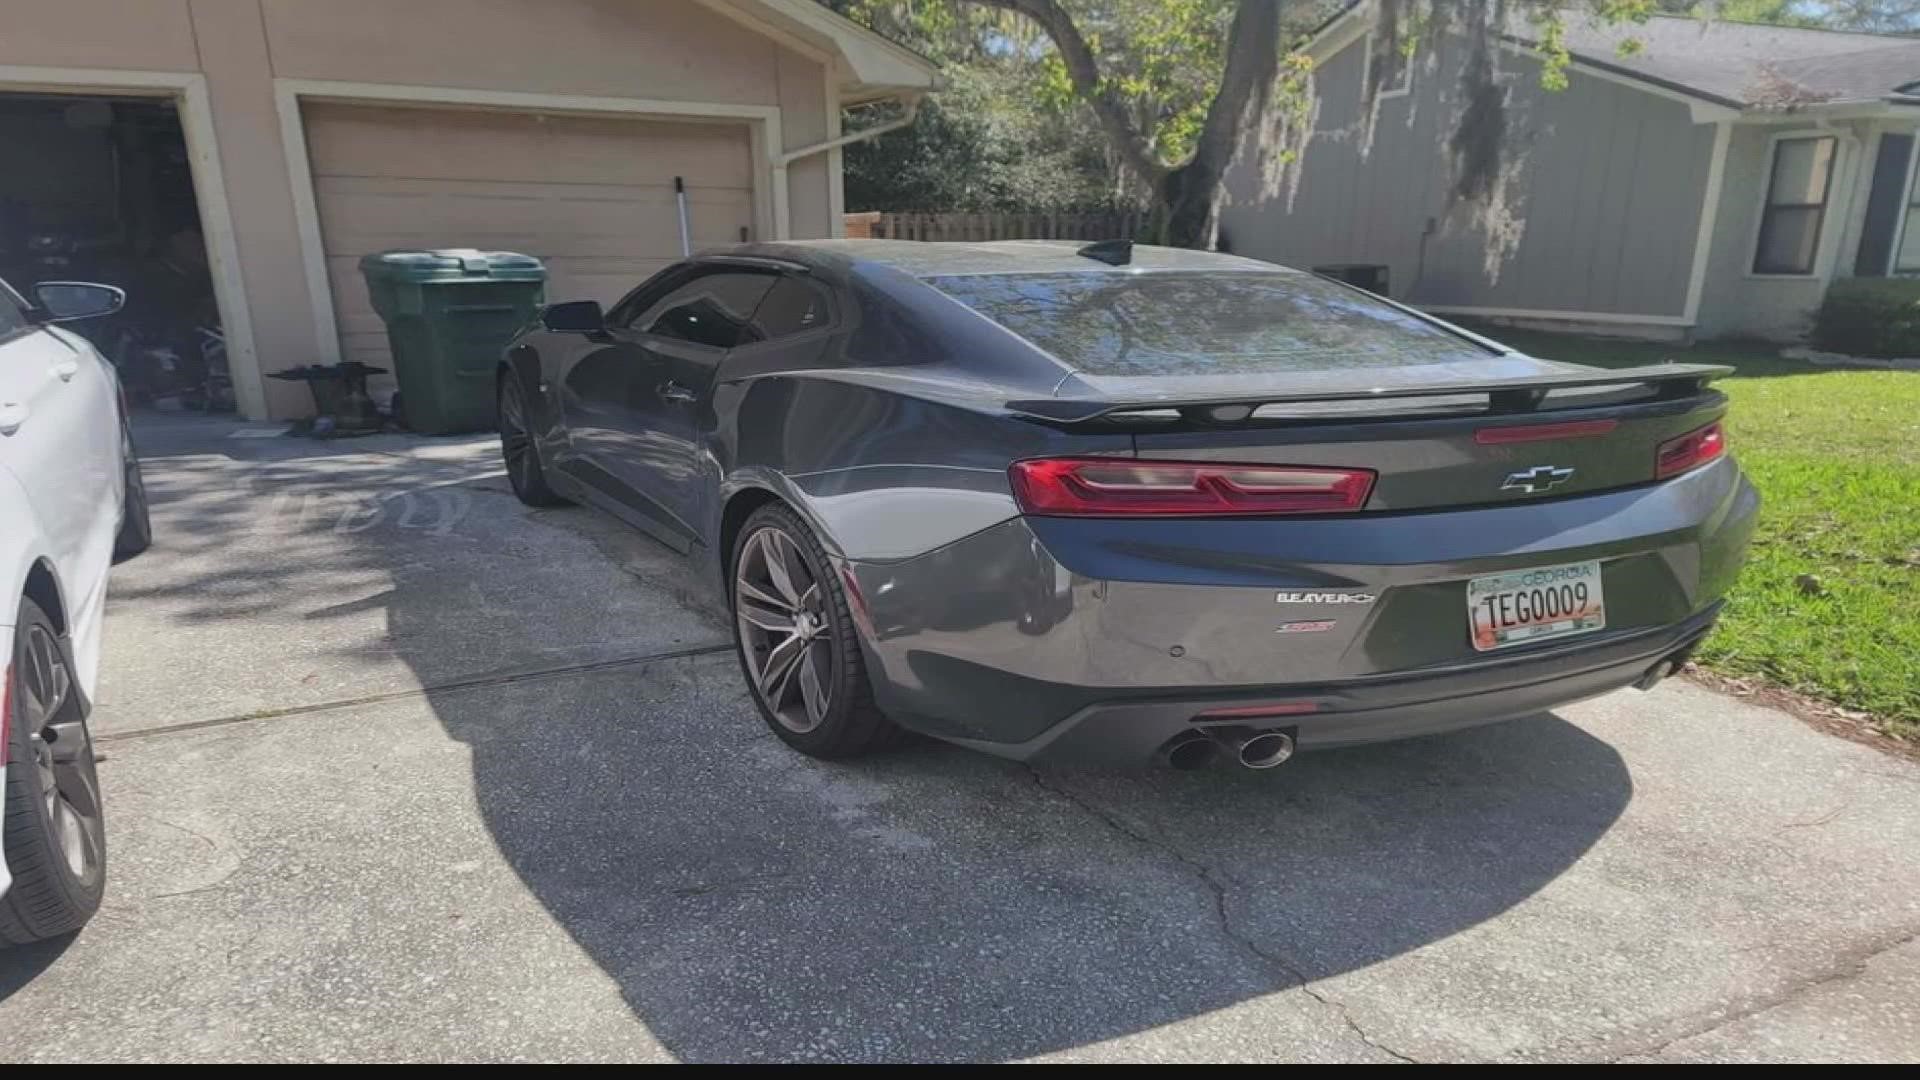 Ethan Hines sold his 2018 Camaro to a man on Facebook Marketplace, but the check bounced days later. He is now on the hook for his $750 monthly payment.